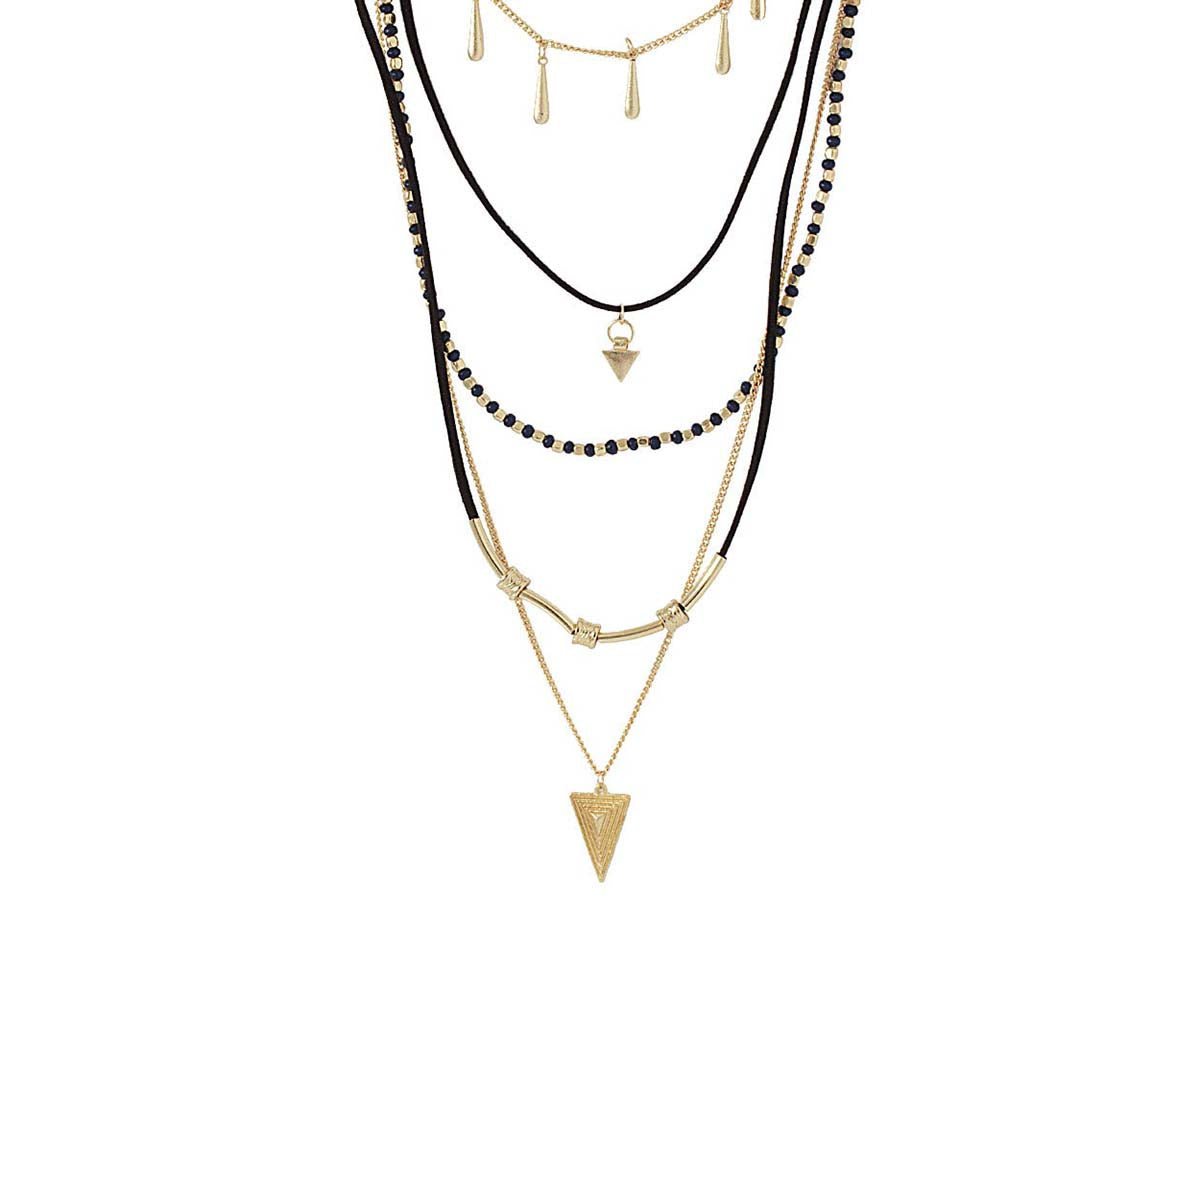 Fascinating Multi-Layered Necklace Adorned With Black And Golden Beads